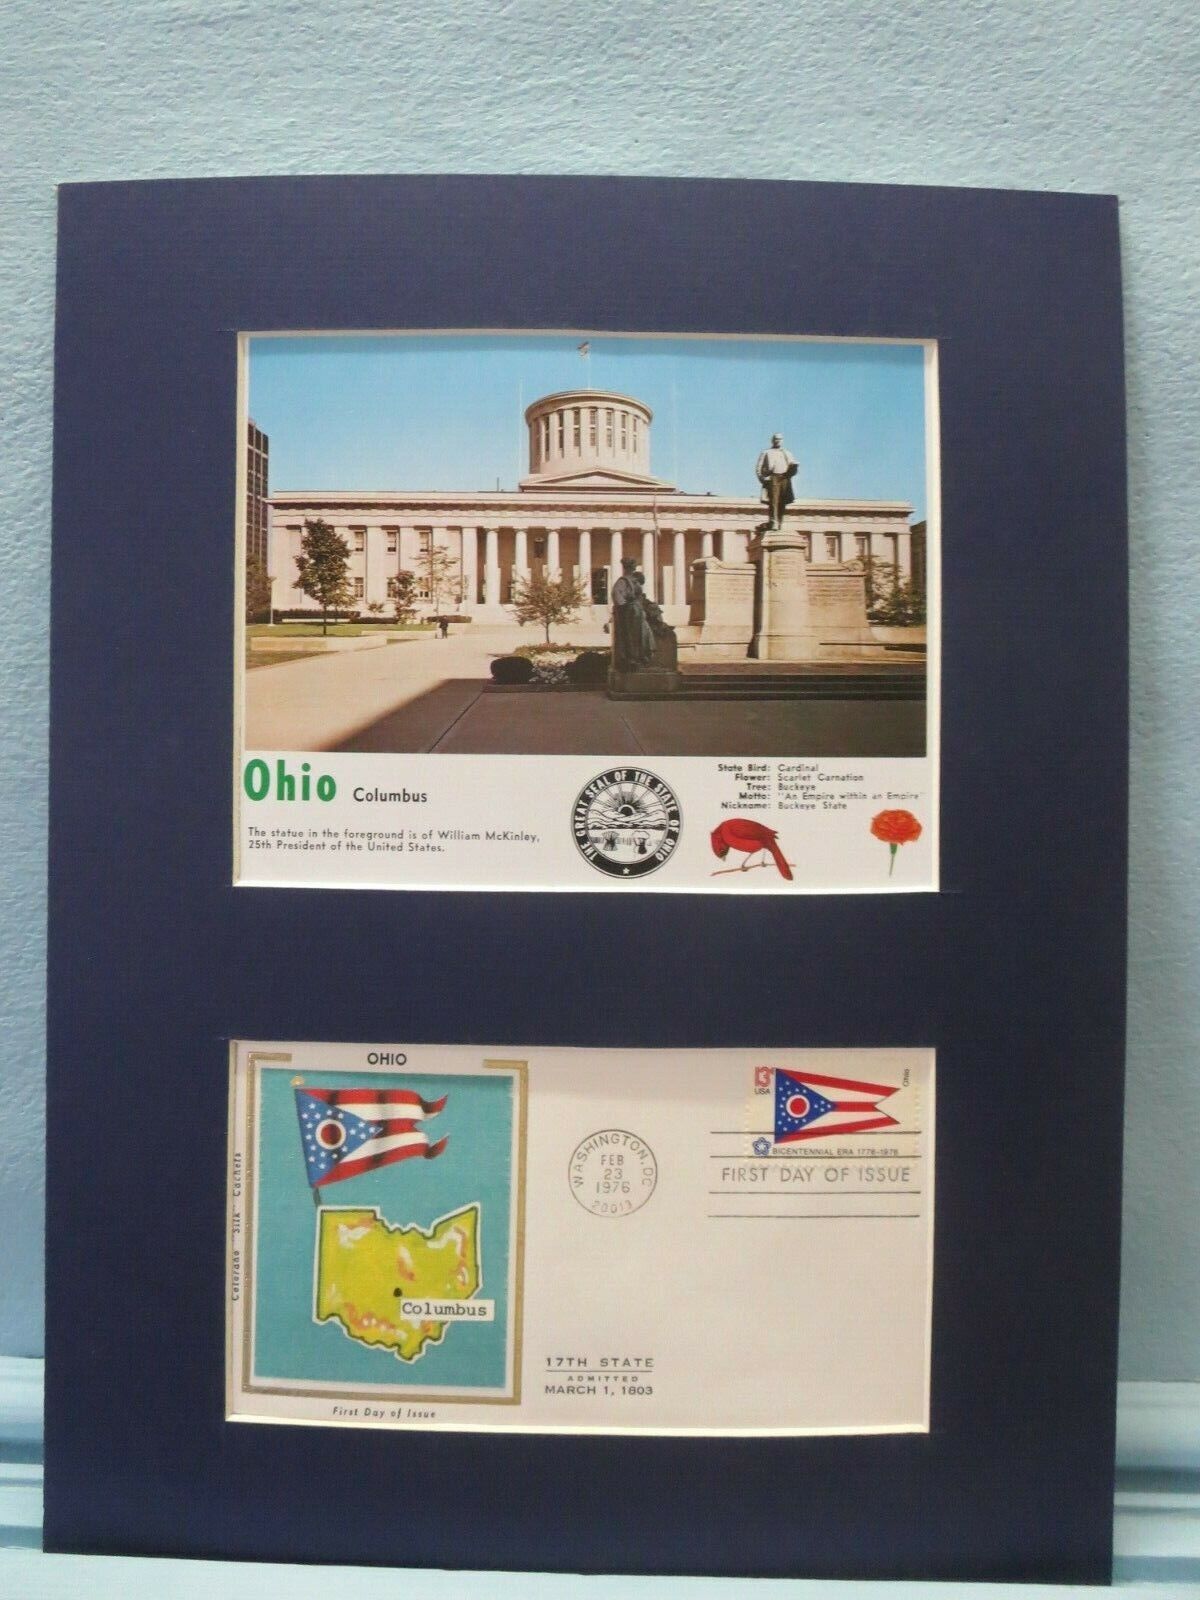 Ohio & its State Capitol in Columbus & First Day Cover for Ohio  Statehood